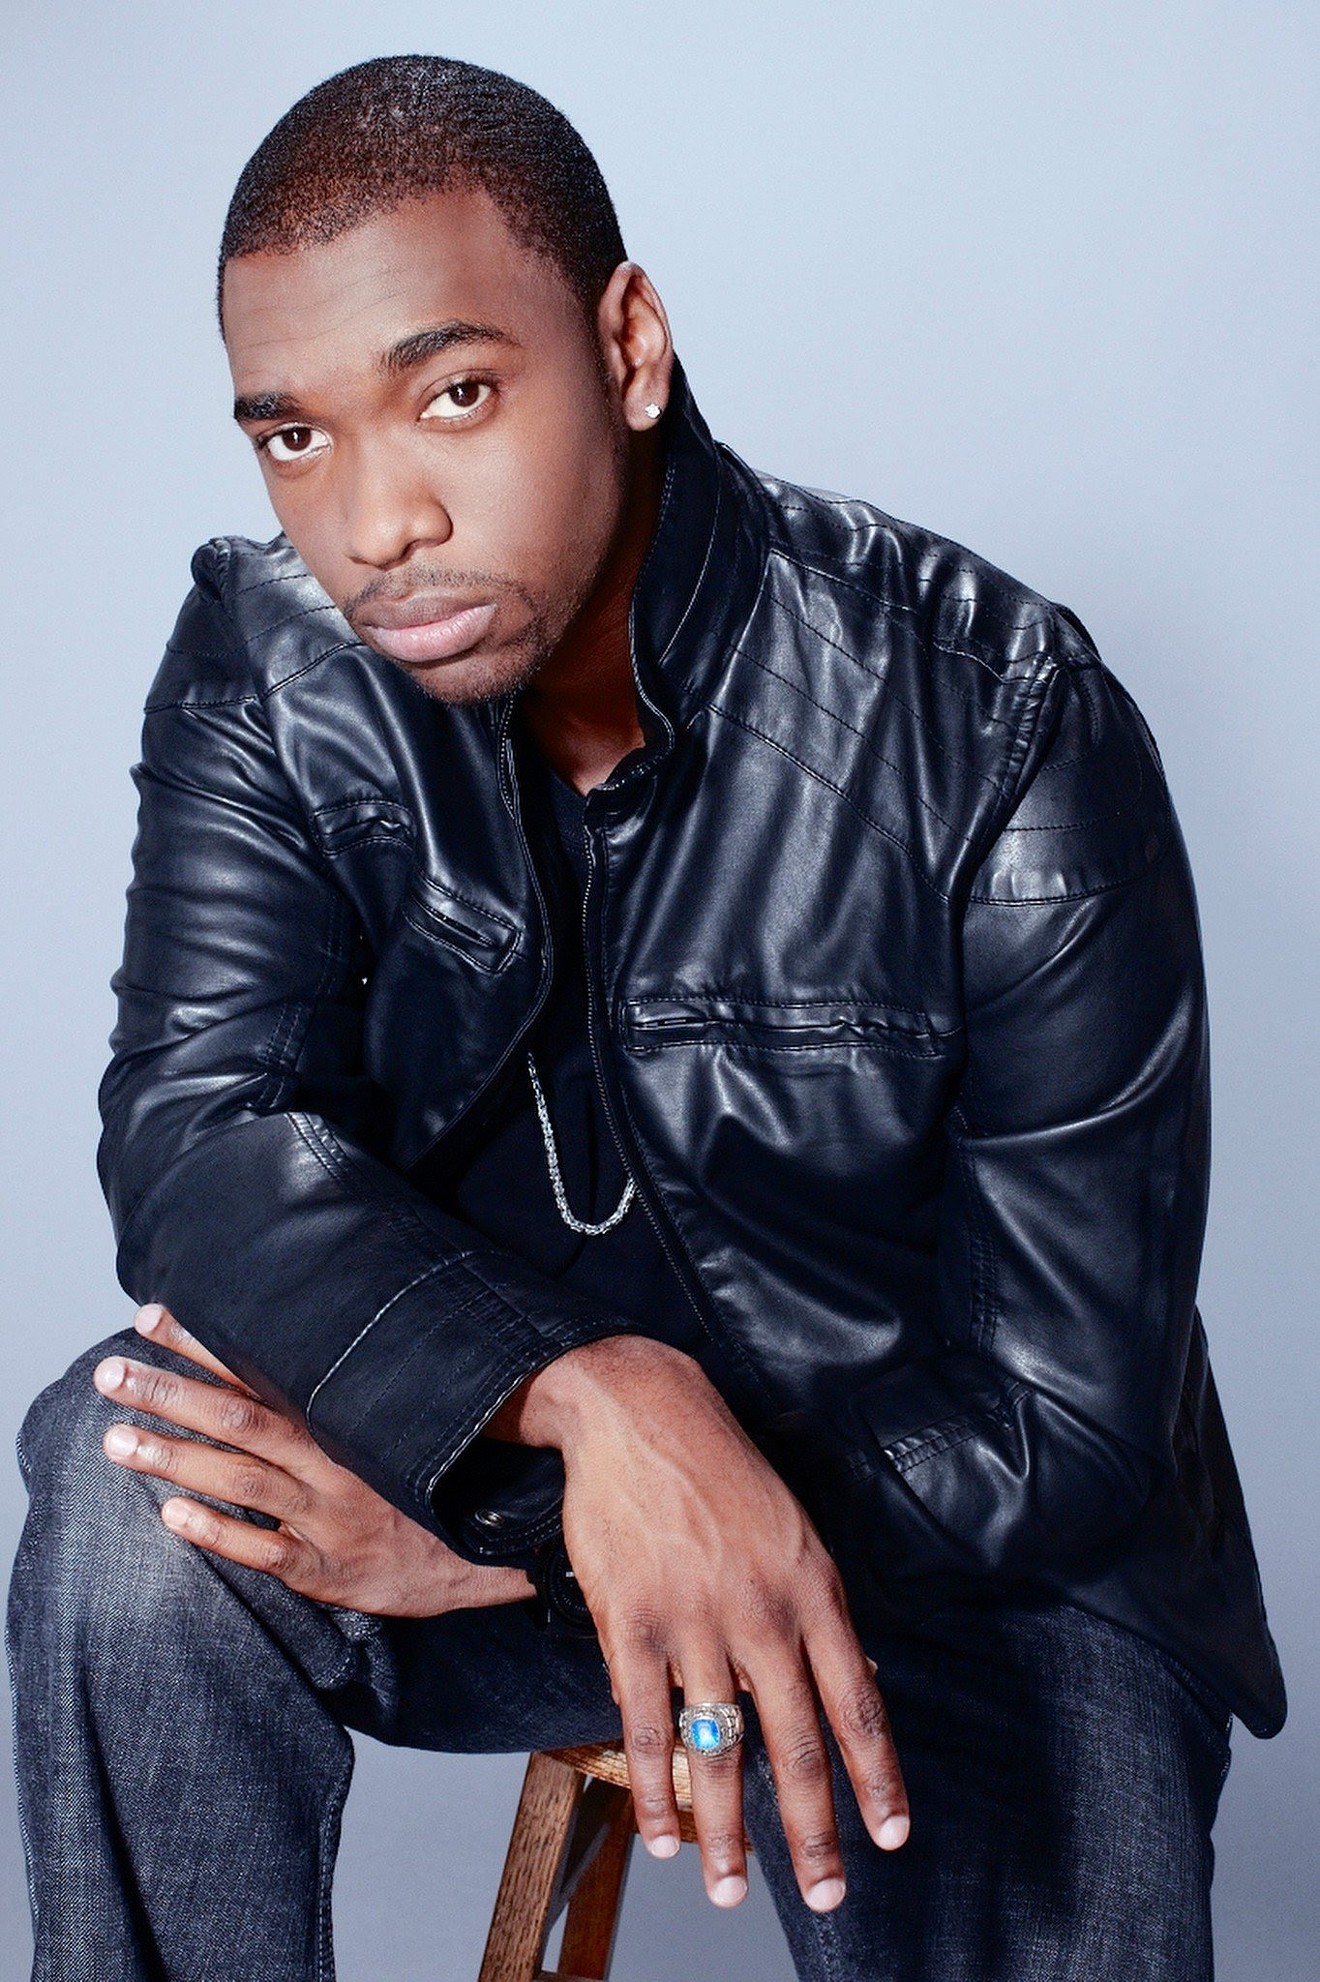 Jay Pharoah got noticed for his impressions, like the one he did of Barack Obama on SNL for six years, but he's got many more tricks up his sleeve as a comedian.